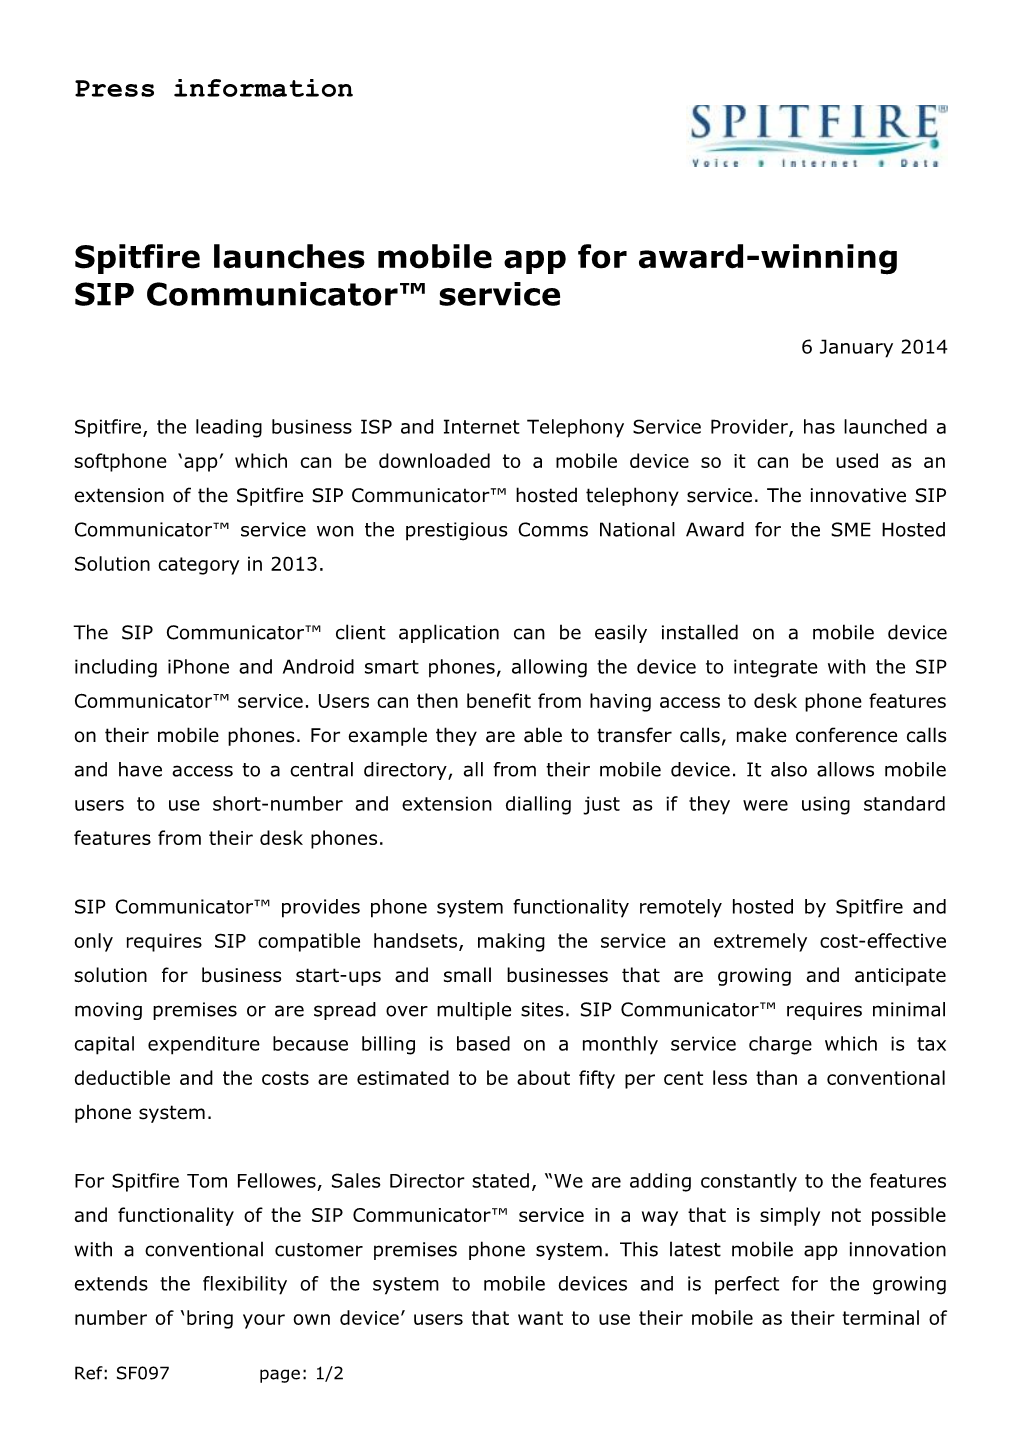 Spitfire Launches Mobile App for Award-Winning SIP Communicator Service